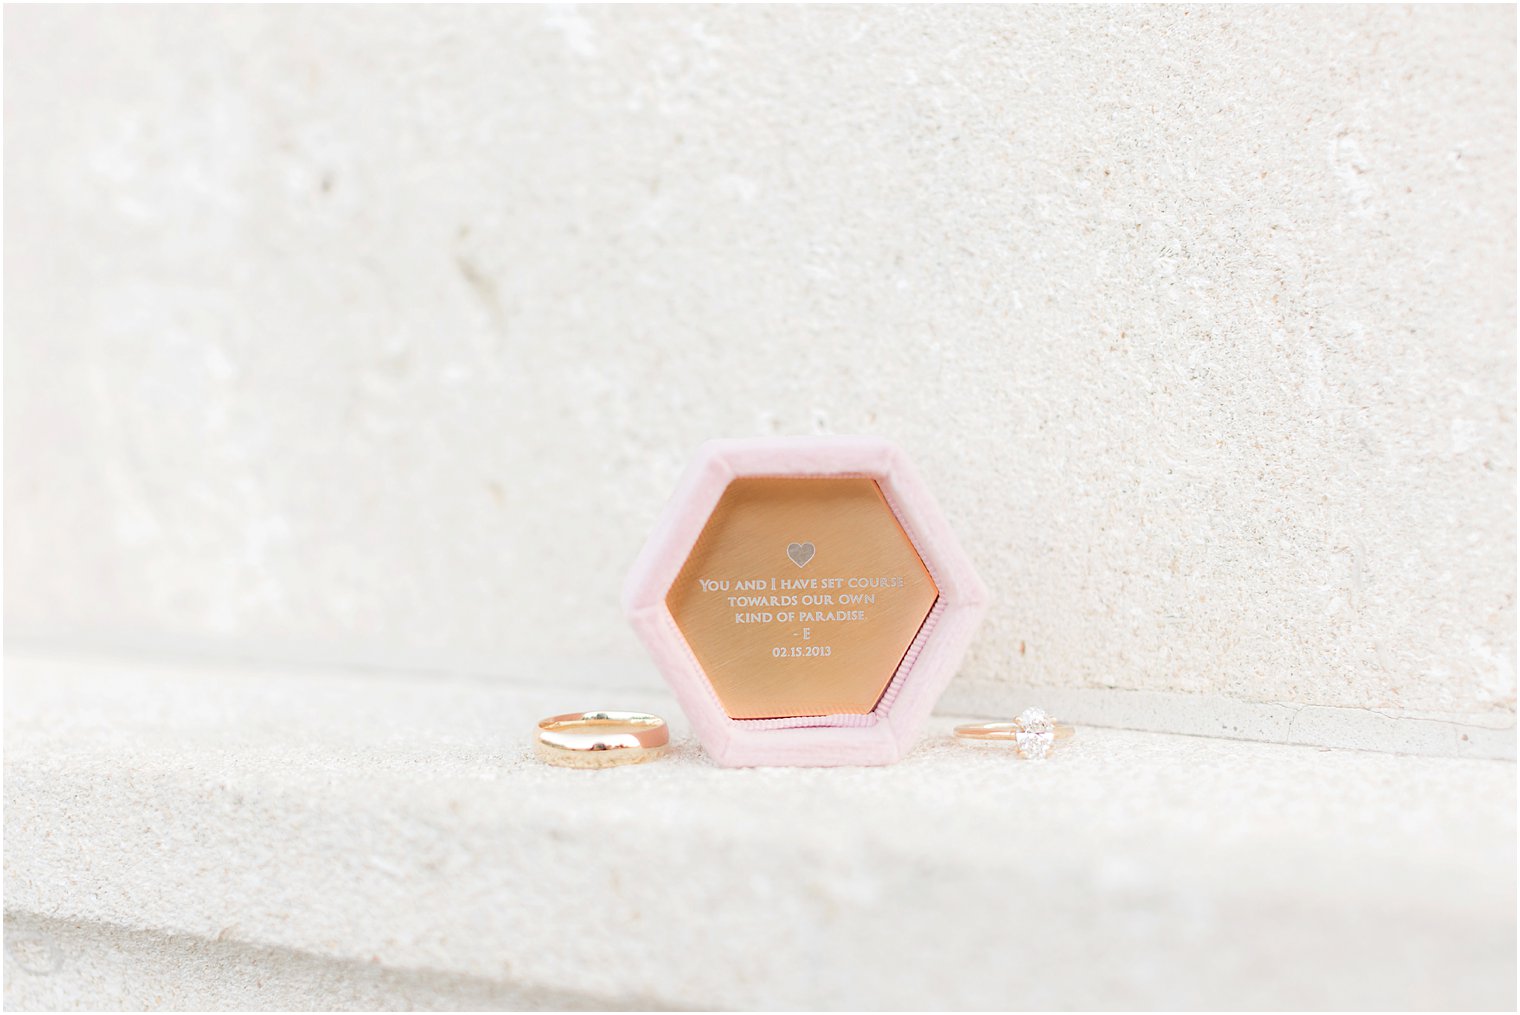 engagement ring rests by pink box with custom engraving